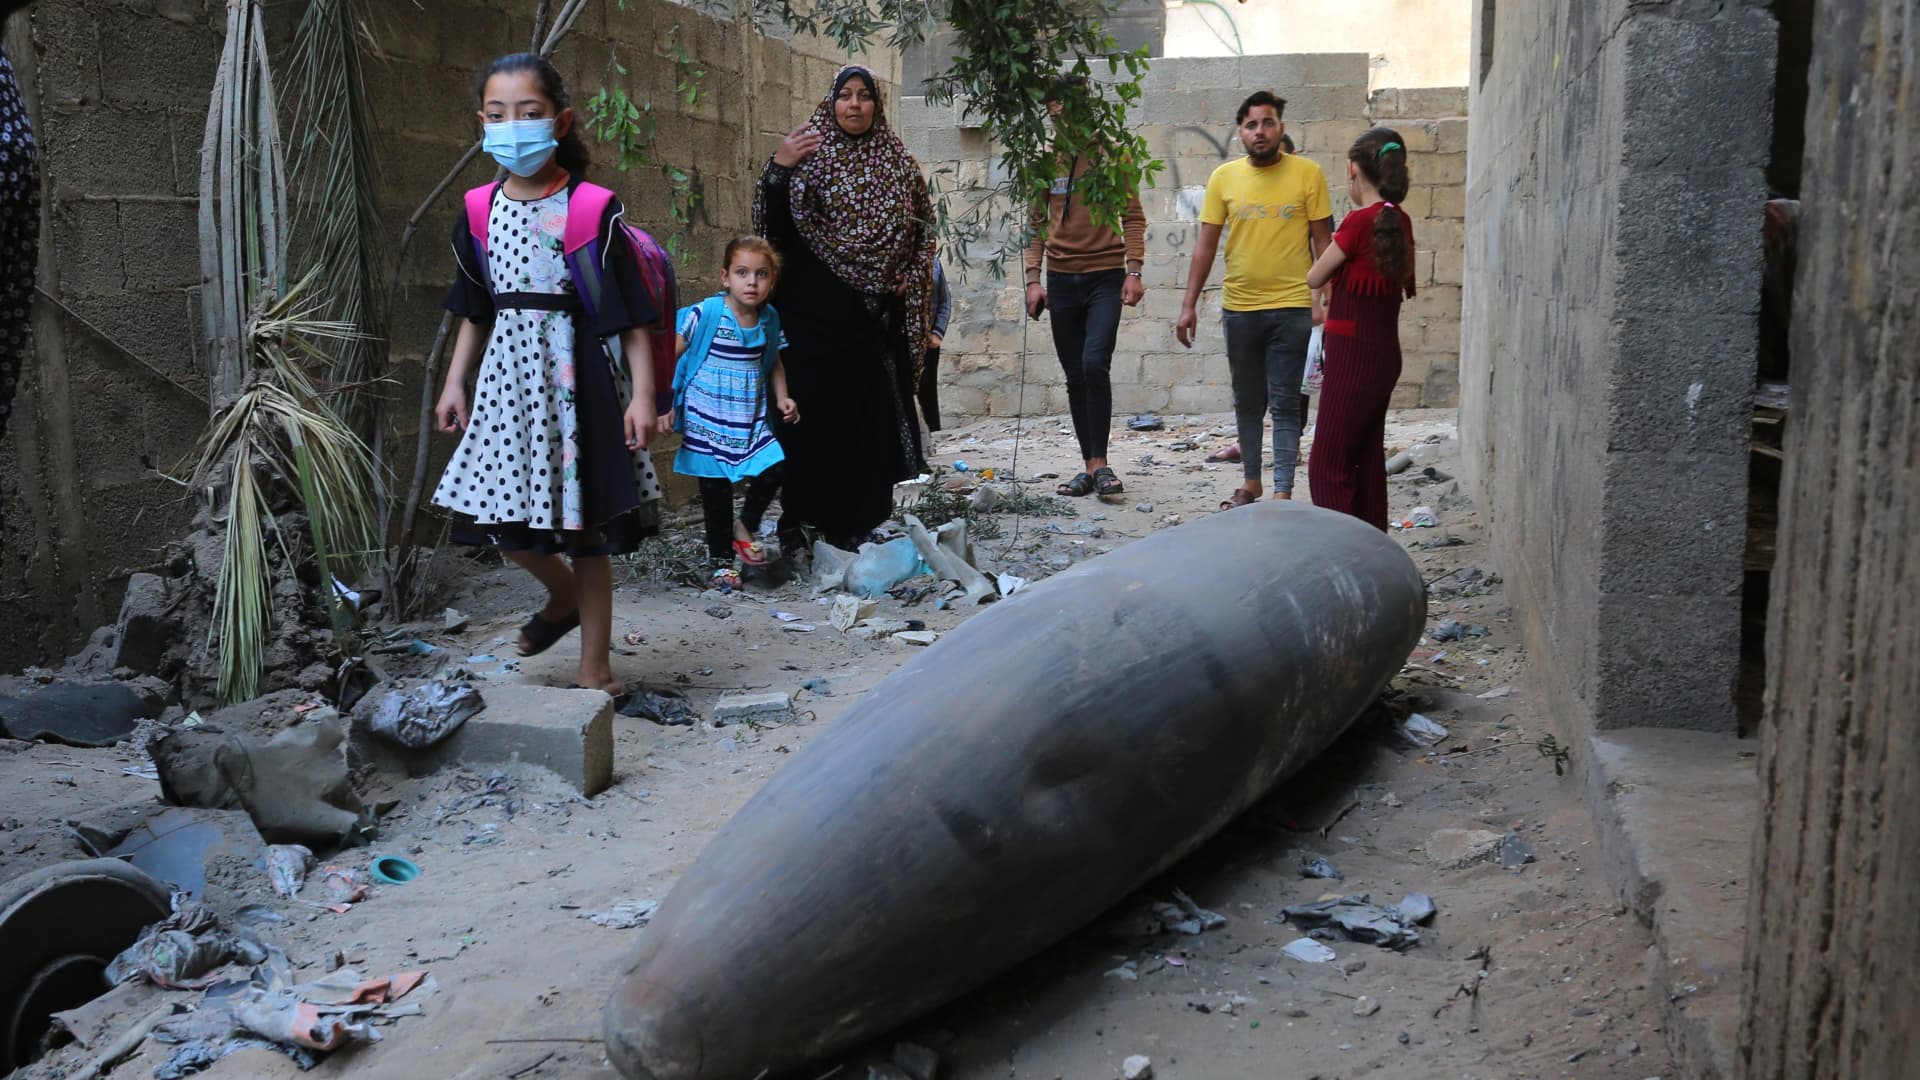 People look at an unexploded missile thrown by Israel in al-Rimal neighborhood as Israeli warplanes continue to carry out airstrikes in Gaza City, Gaza on May 18, 2021.